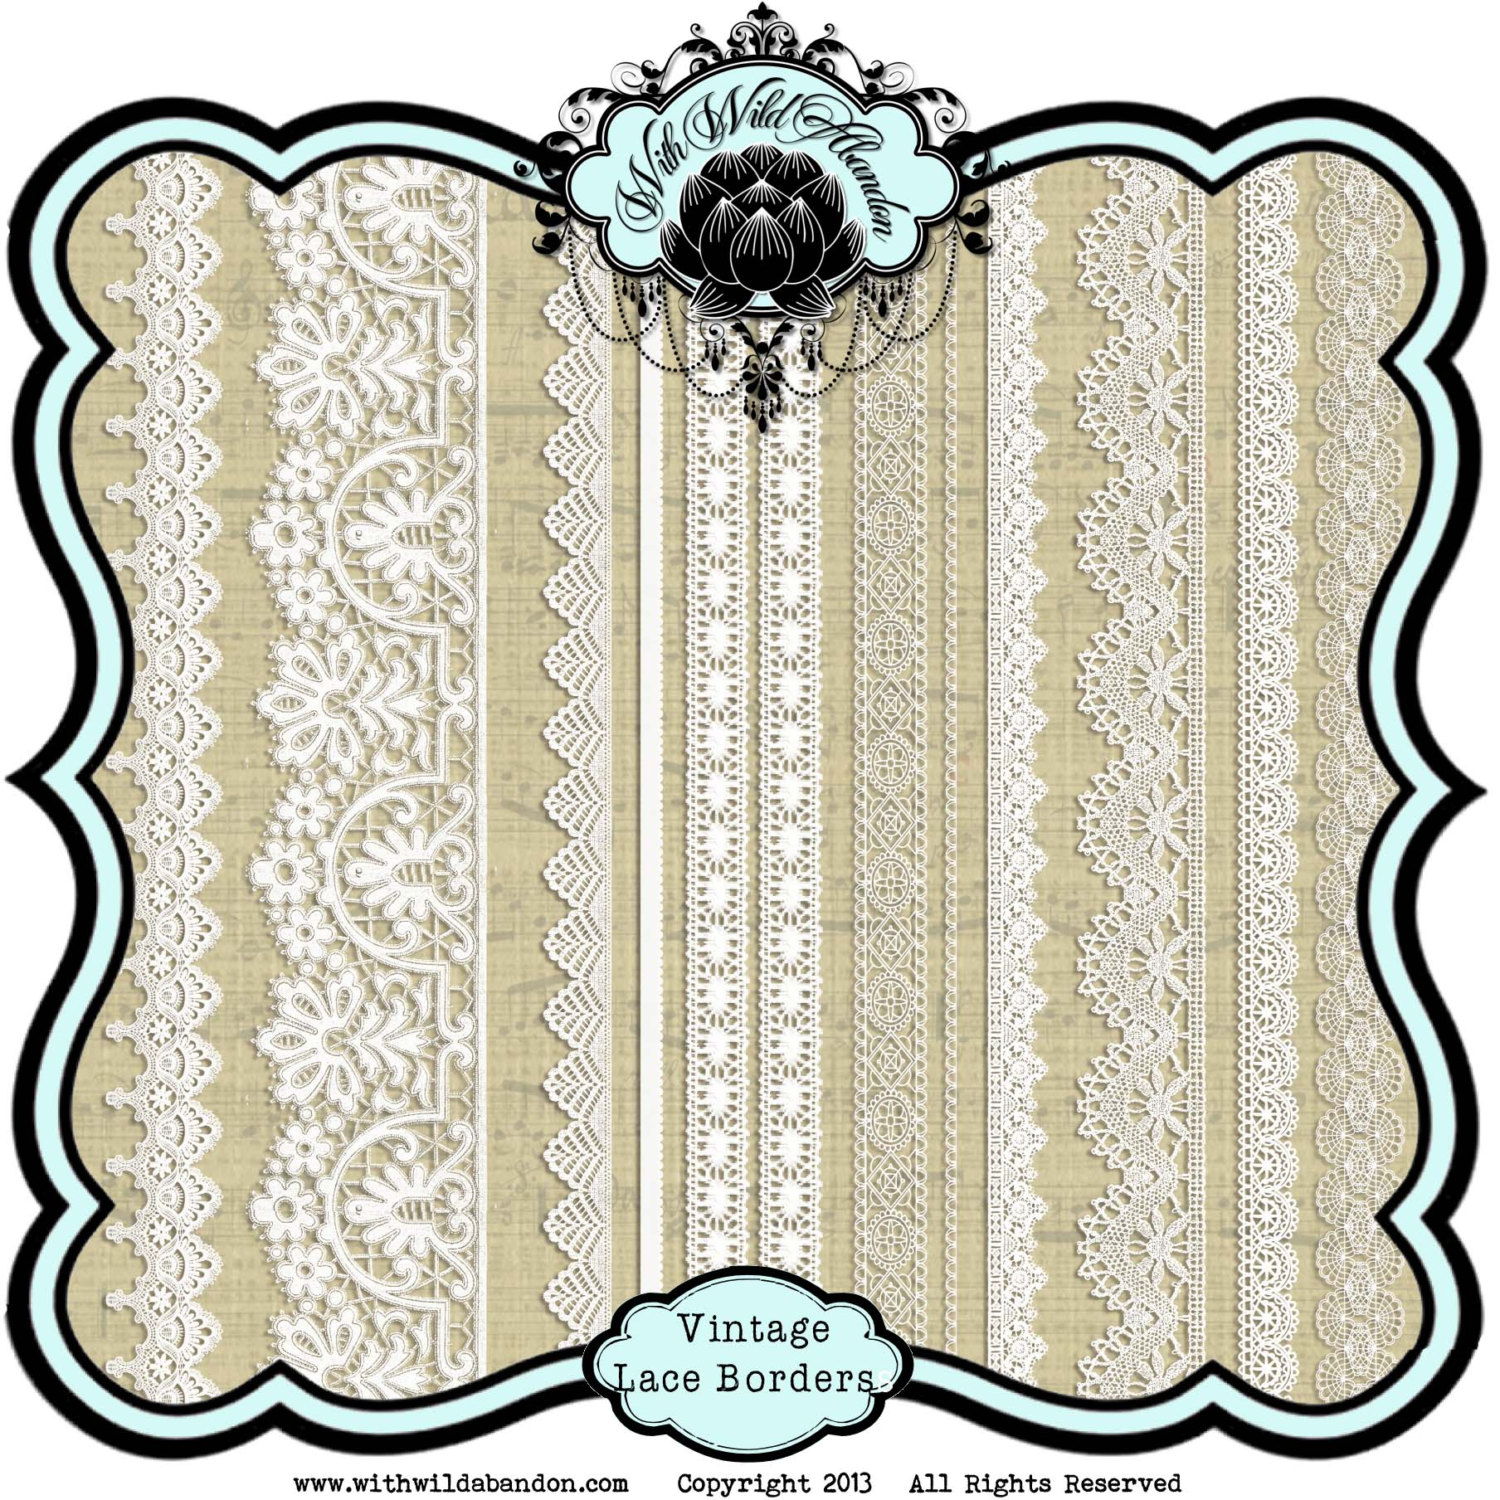 Digital Download Discoveries for LACE OVERLAY from EasyPeach.com